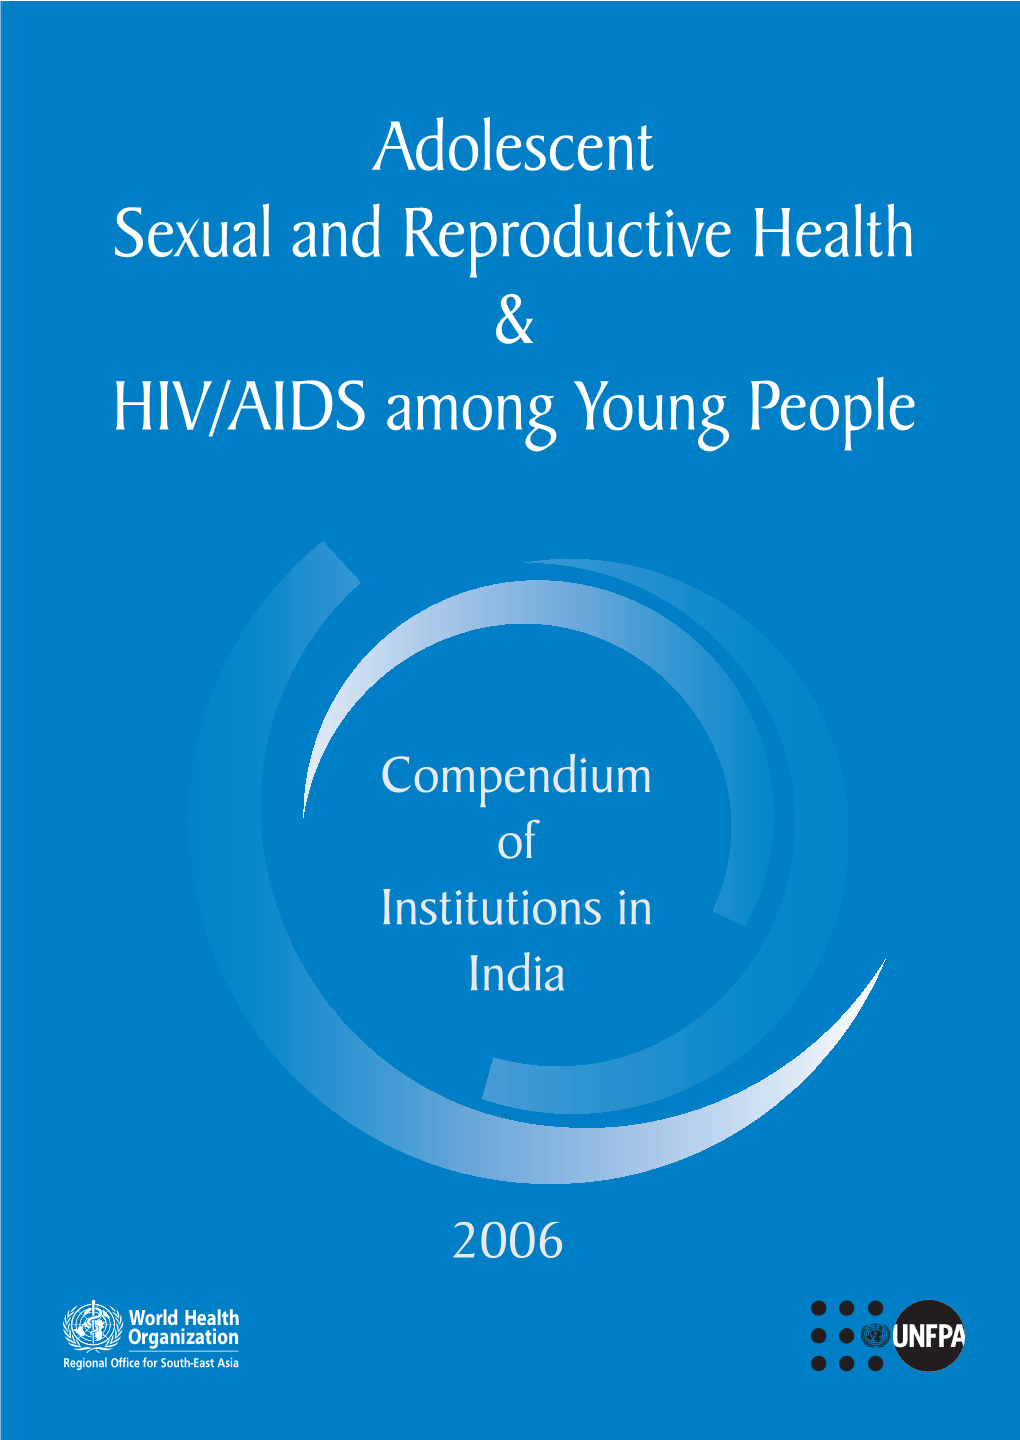 Adolescent Sexual and Reproductive Health & HIV/AIDS Among Young